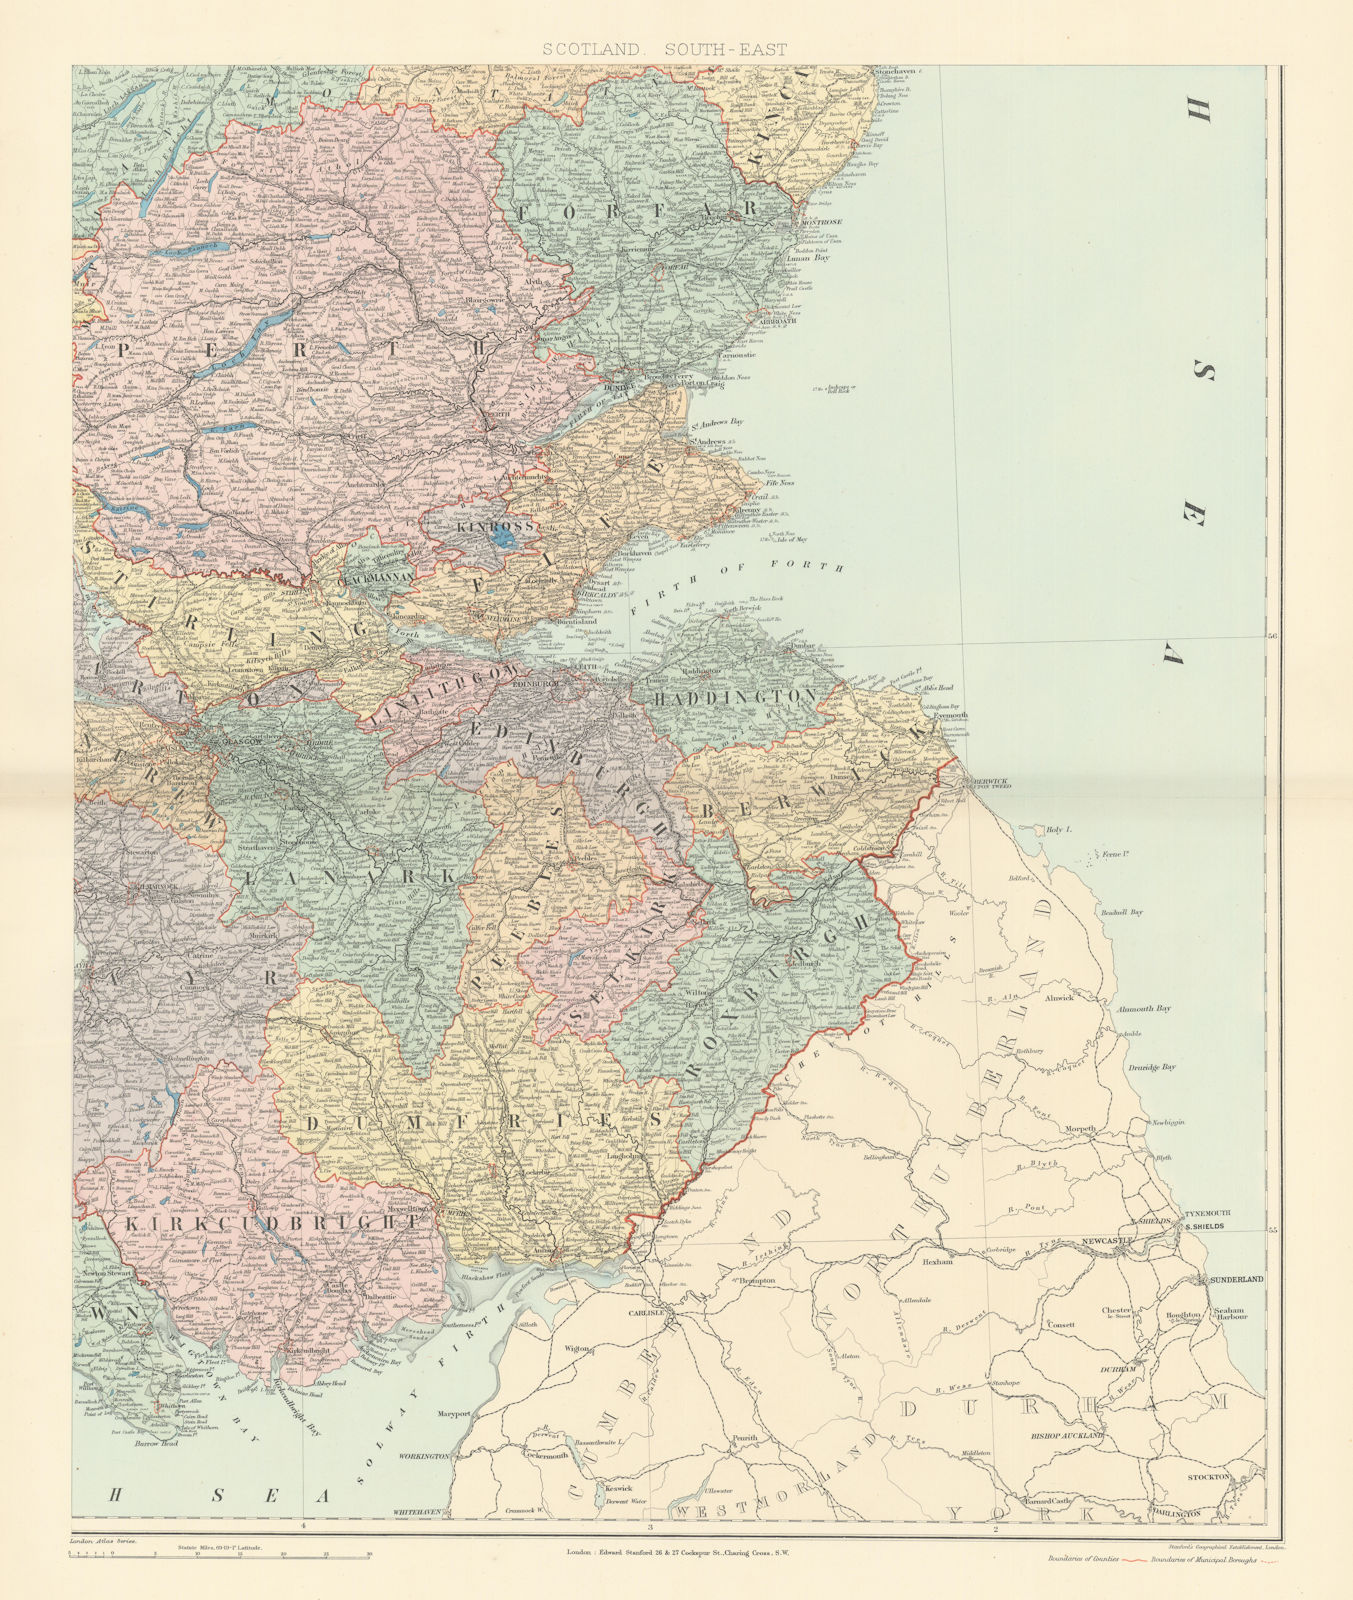 Associate Product Scotland S.E. Borders Central Firth of Forth Perth. 61x50cm. STANFORD 1896 map